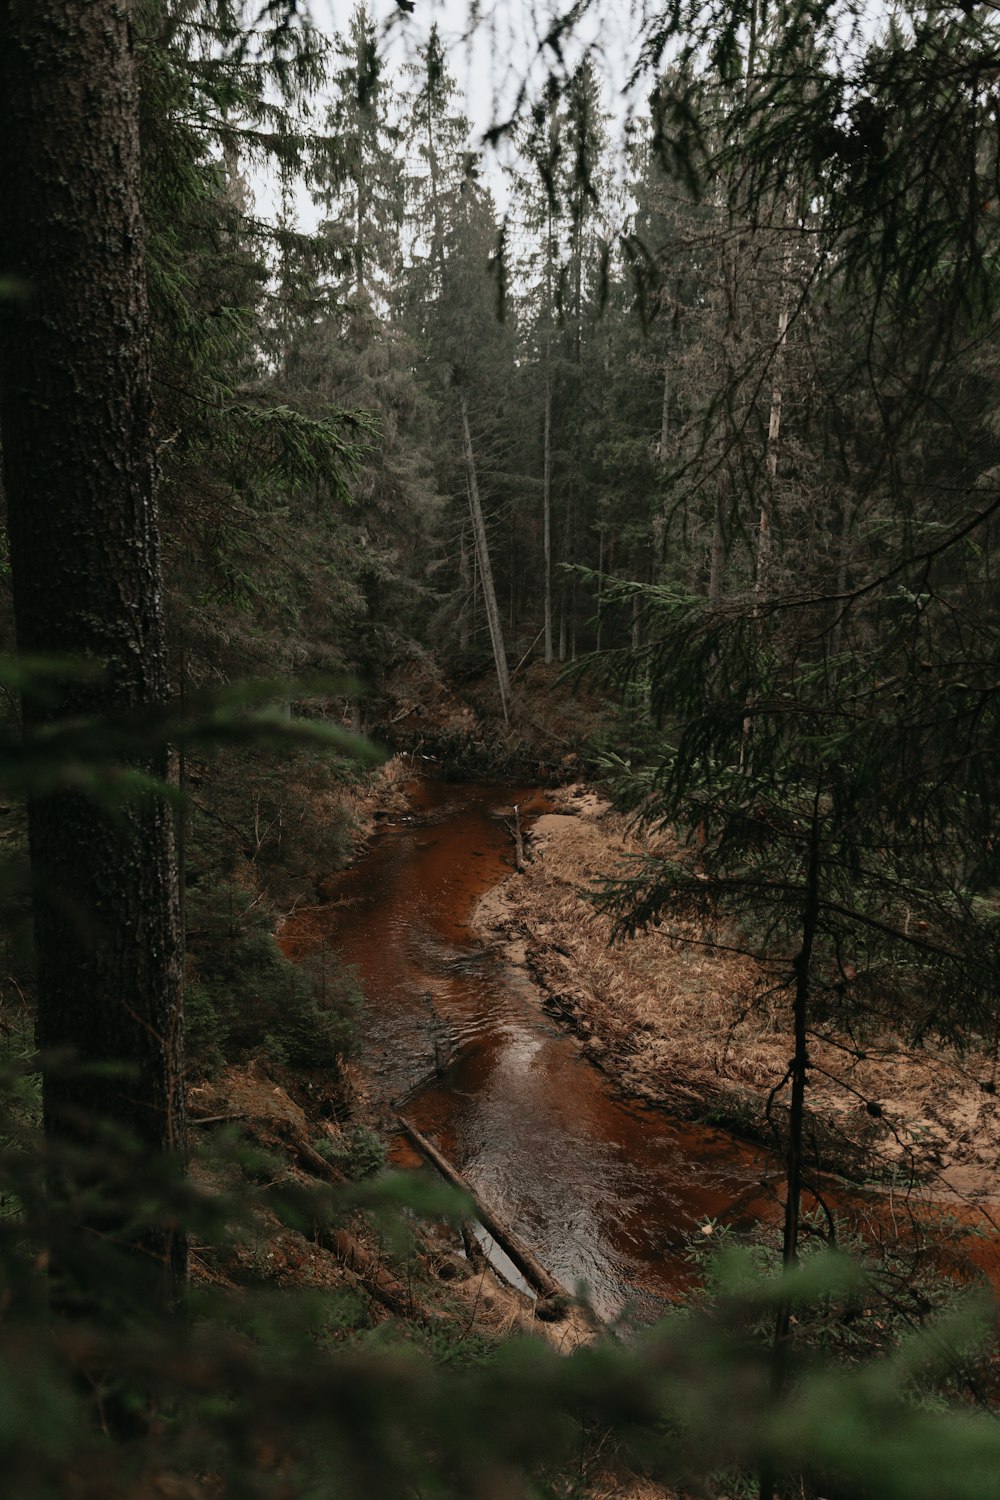 river in the middle of forest during daytime